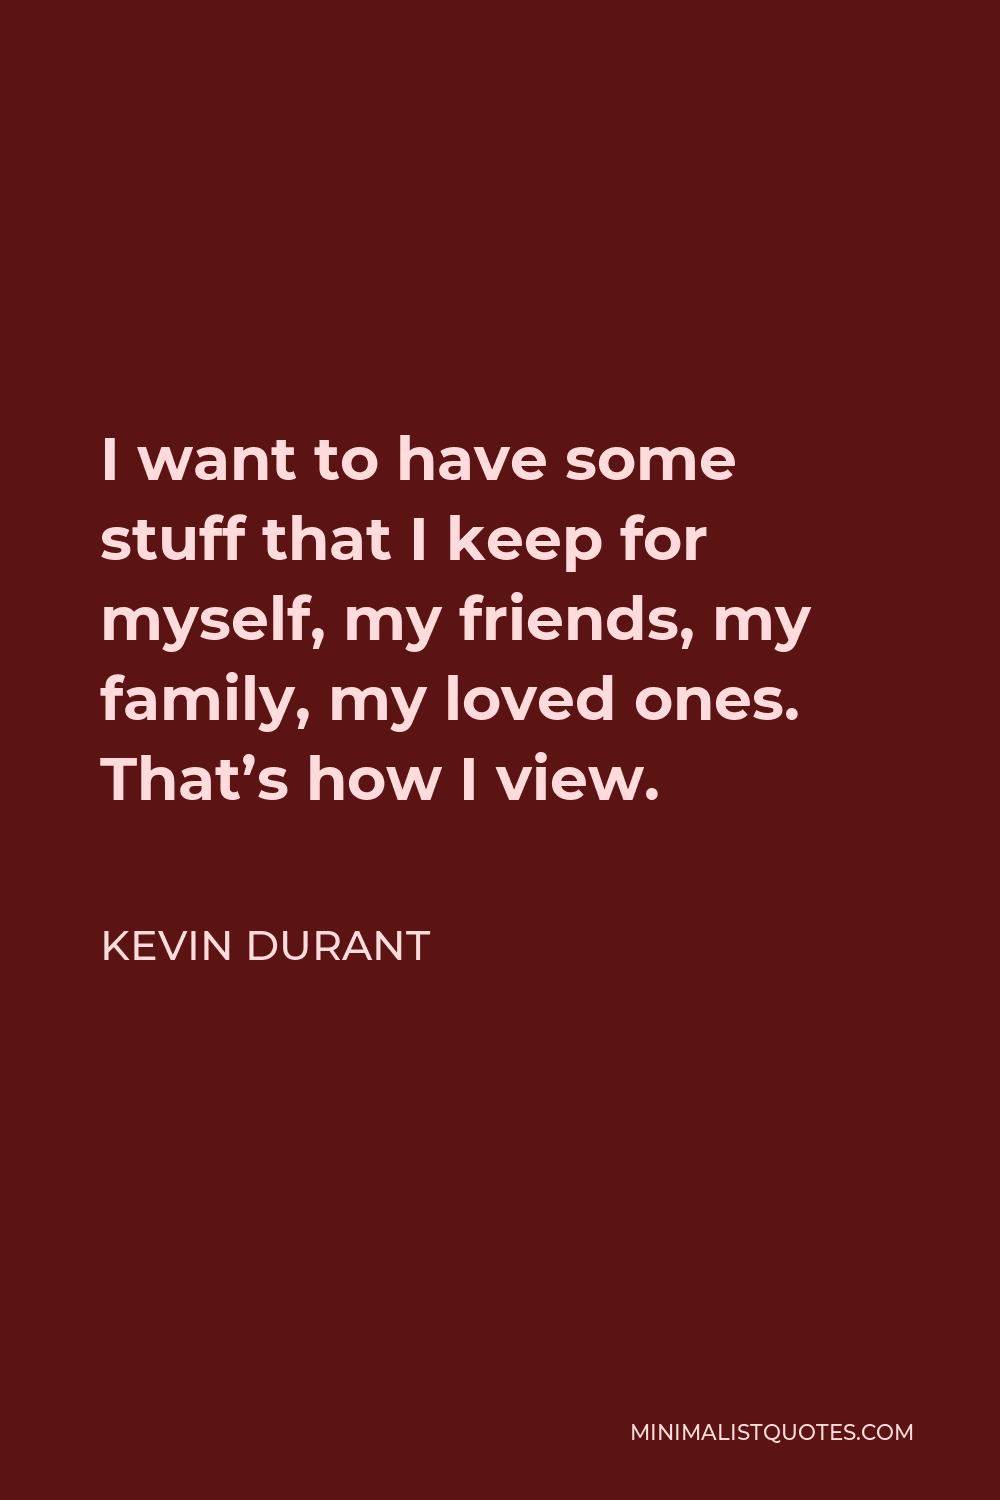 Kevin Durant Quote - I want to have some stuff that I keep for myself, my friends, my family, my loved ones. That’s how I view.